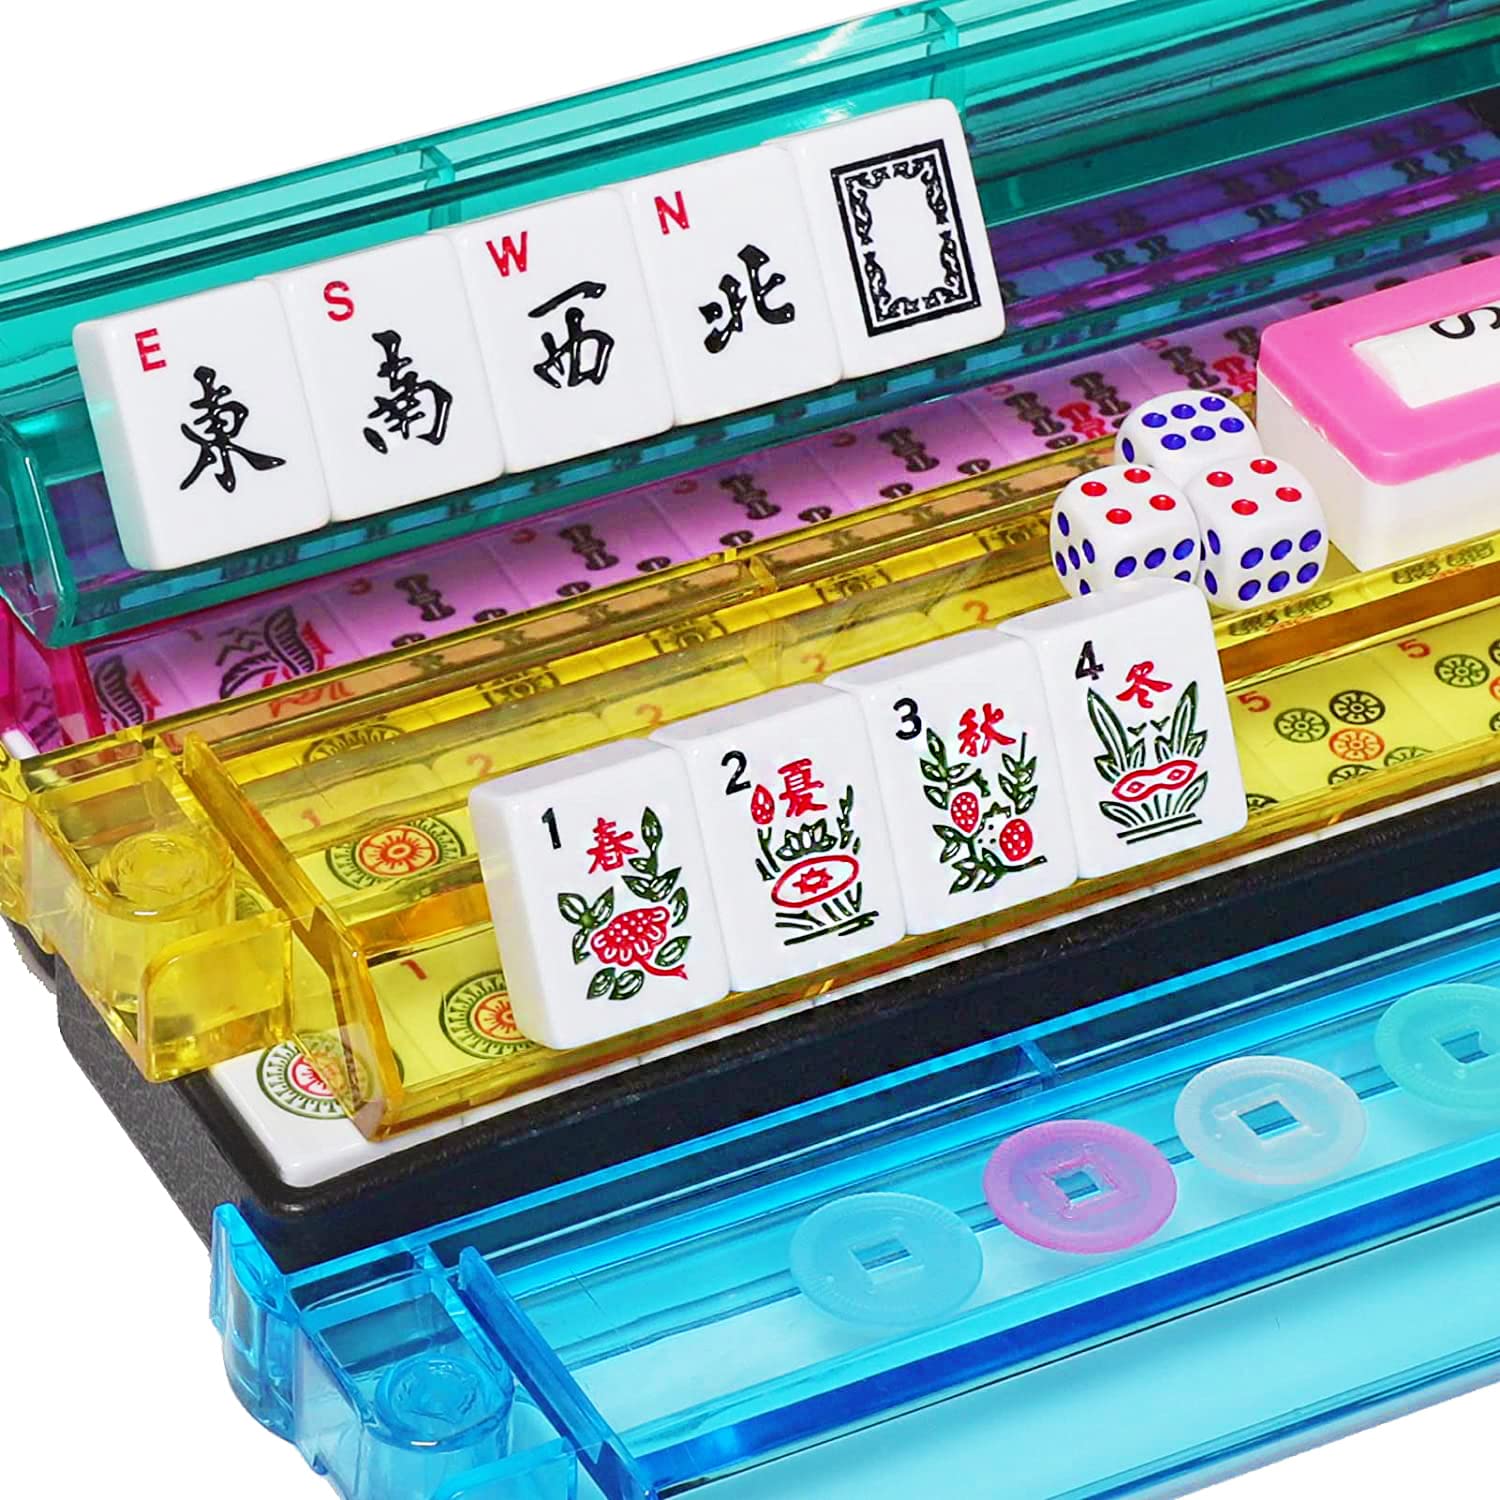 American Mahjong Game Set,Black Carrying Bag,166 Premium White Tiles,4 All-in-One Color Rack/Pushers,100 Chips,1 Wind Indicator,Quality Western Mahjongg Set,Complete Ma Jong Set with English Manual